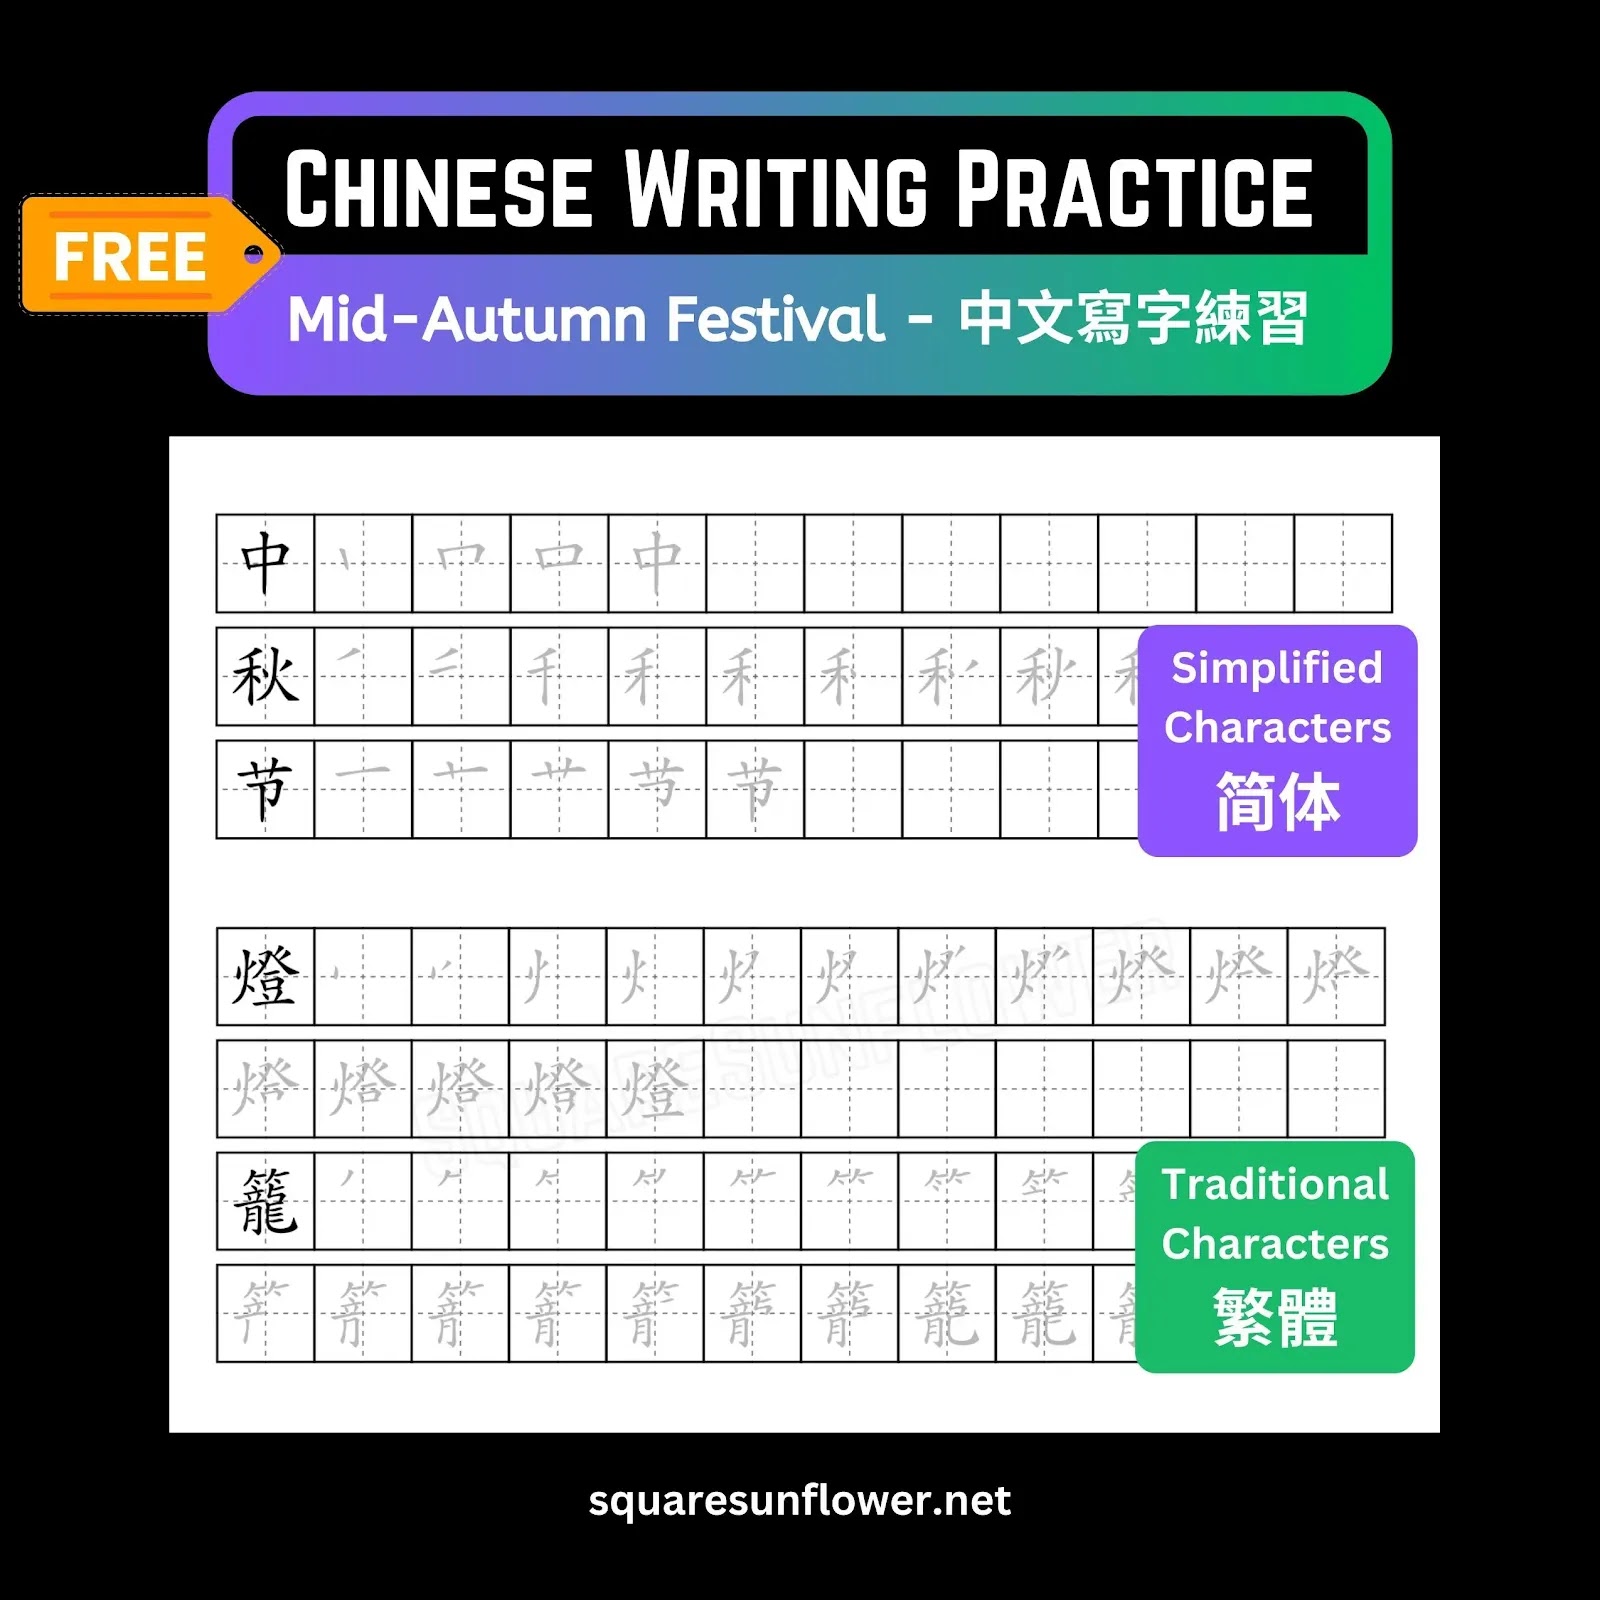 Learn to write Mid-Autumn Festival words printable Chinese writing practice sheets